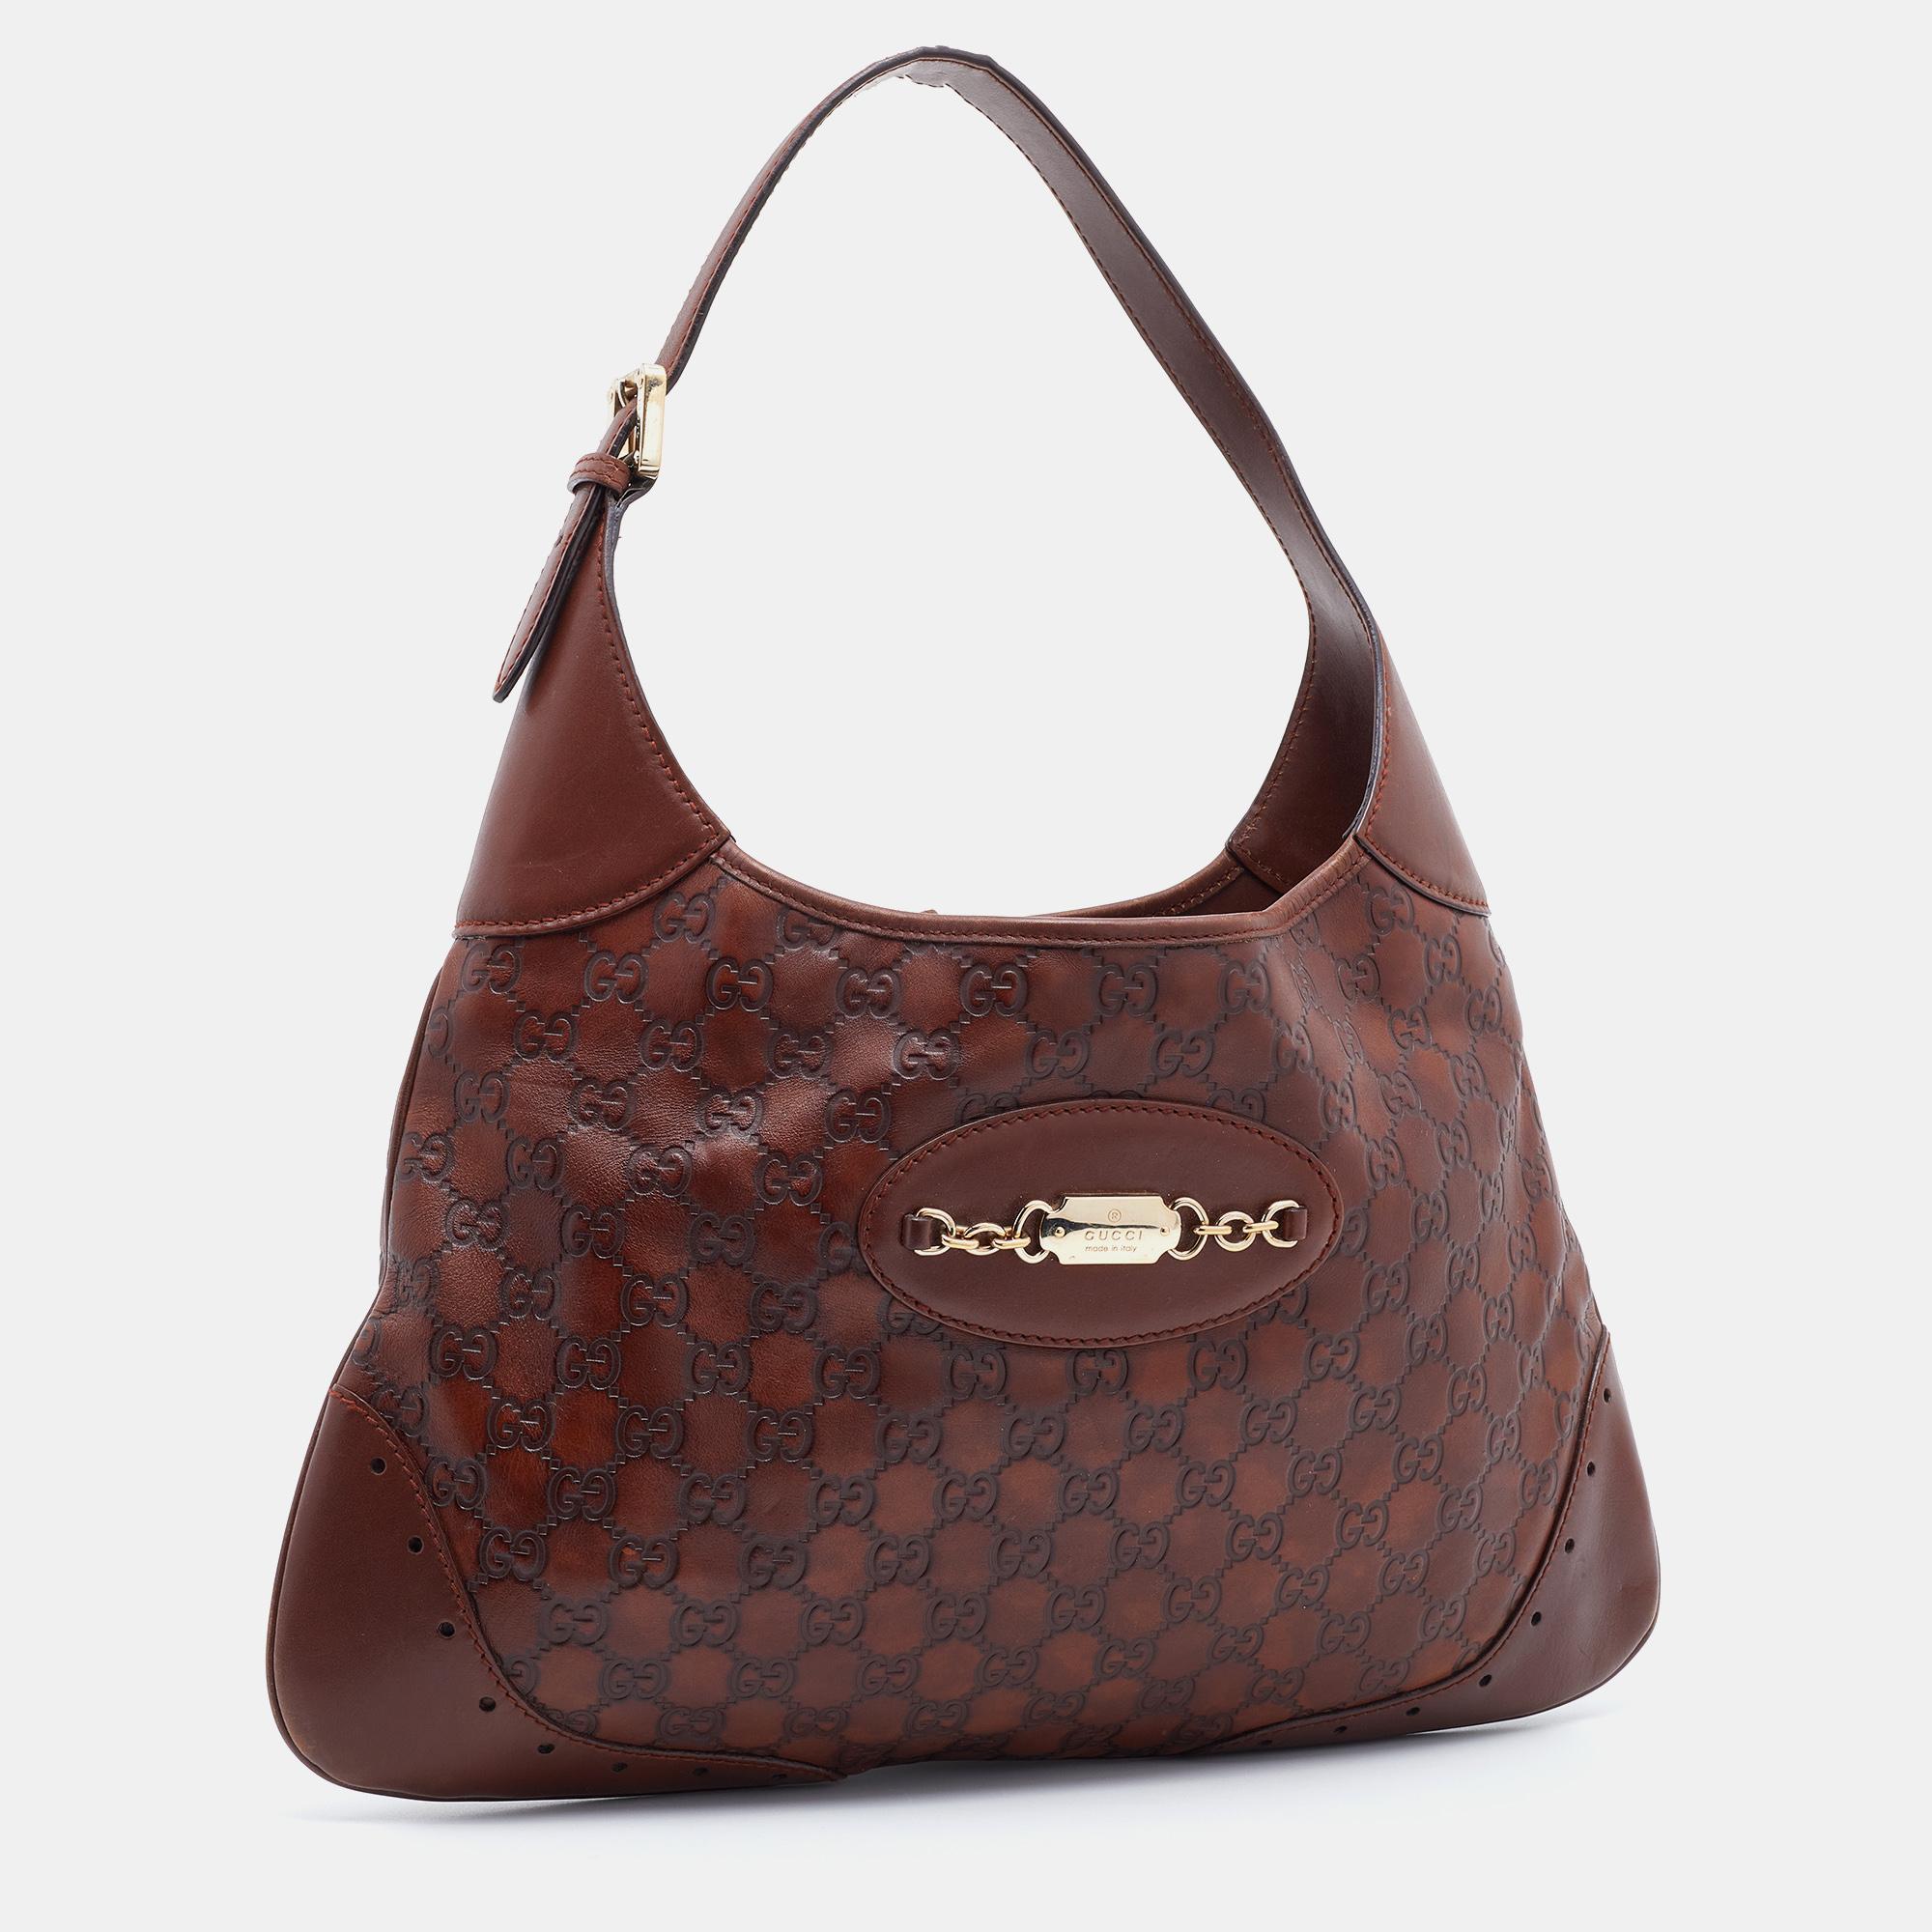 Women's Gucci Brown Guccissima Leather Punch Hobo